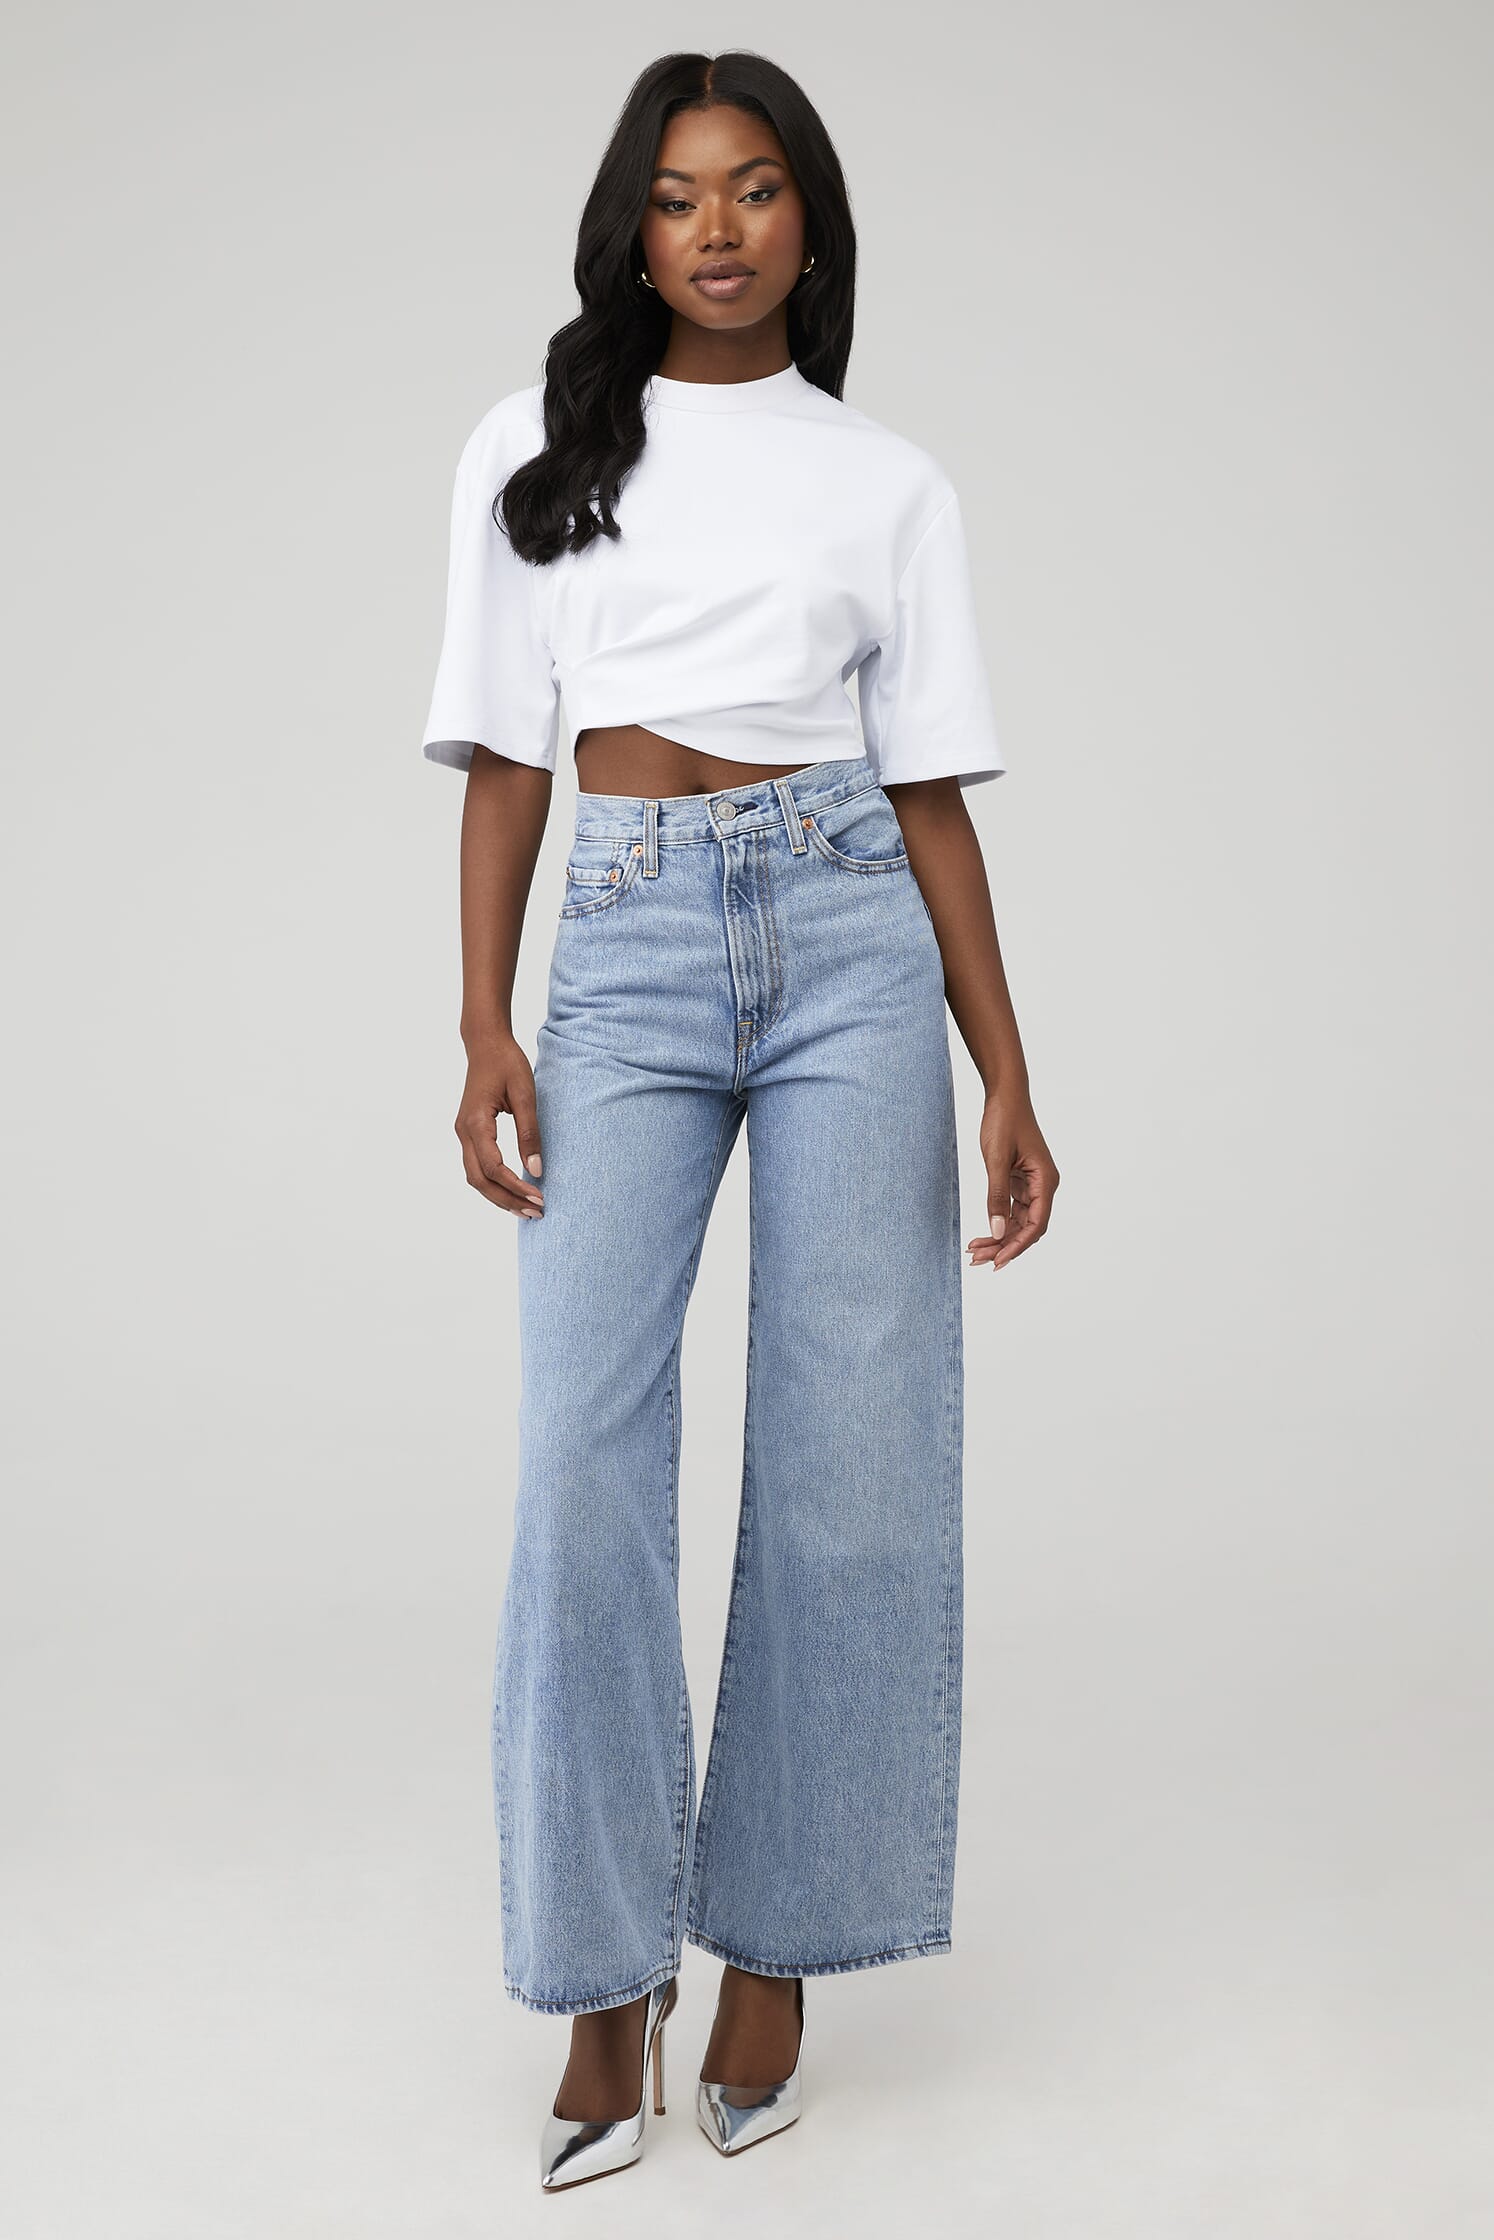 https://images.fashionpass.com/products/ribcage-wide-leg-levis-far-and-wide-311-4.jpg?profile=a